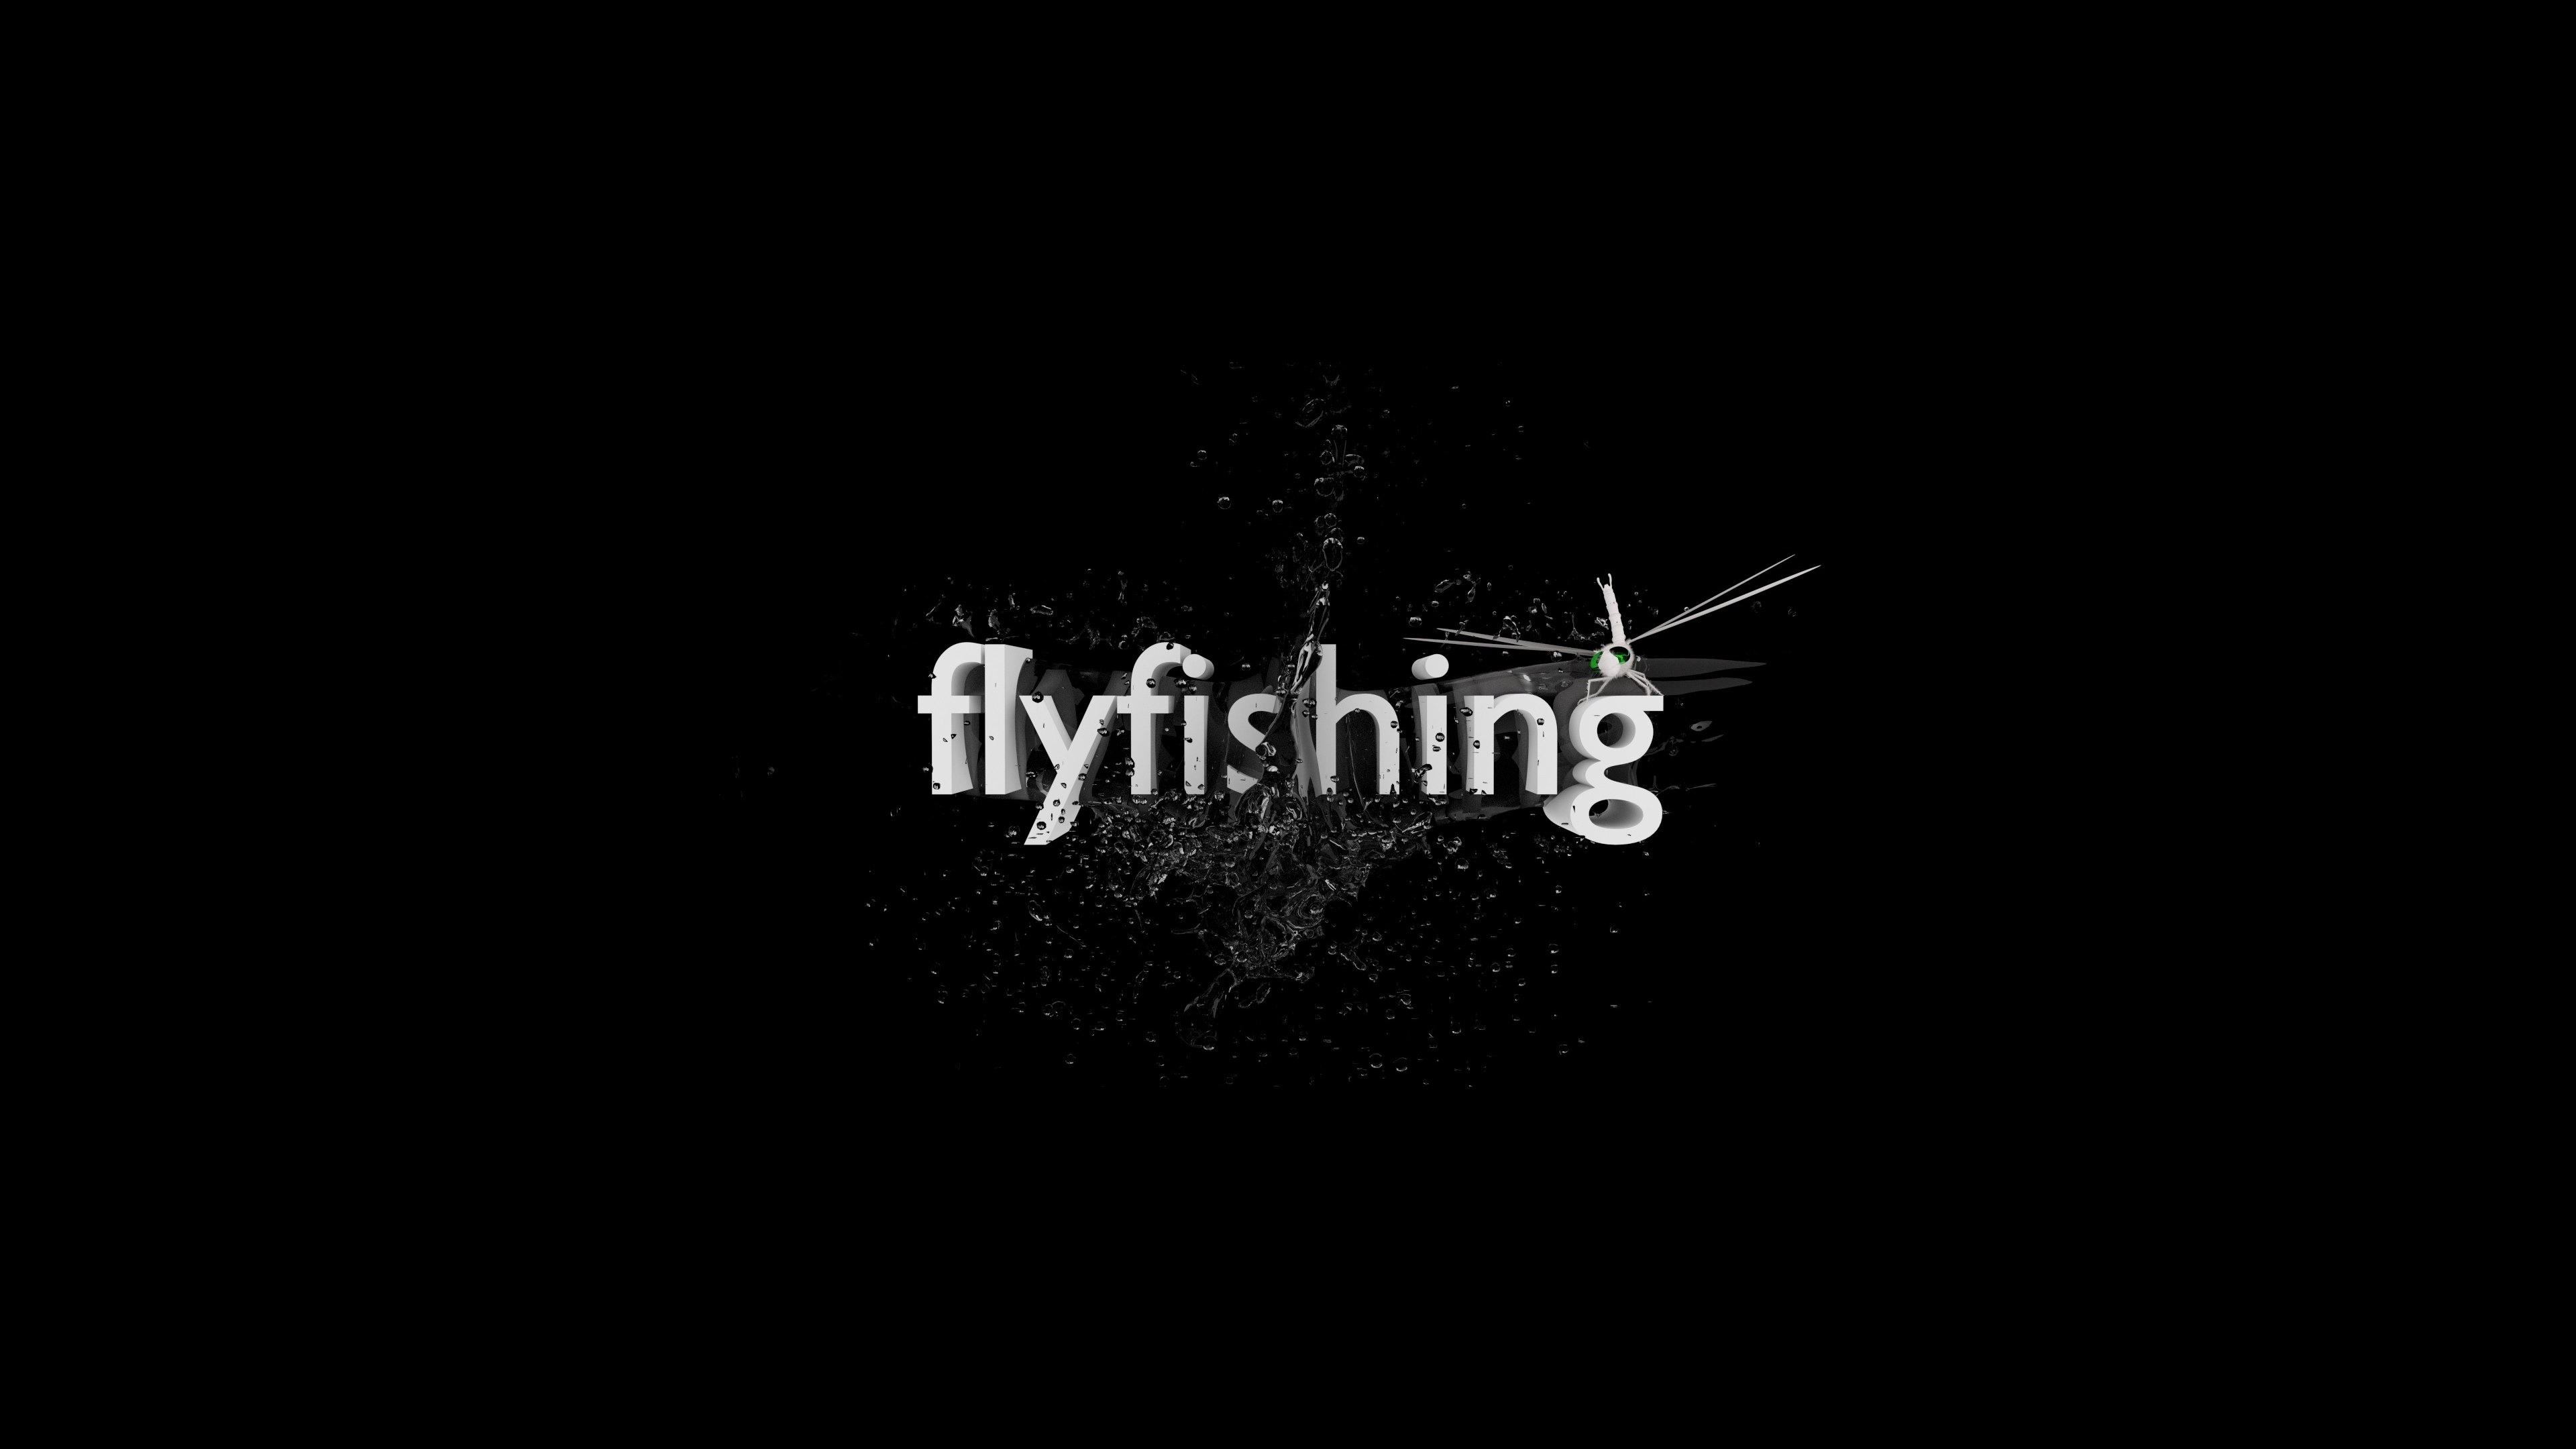 Photoshop Fly Fishing by DirtyOpi